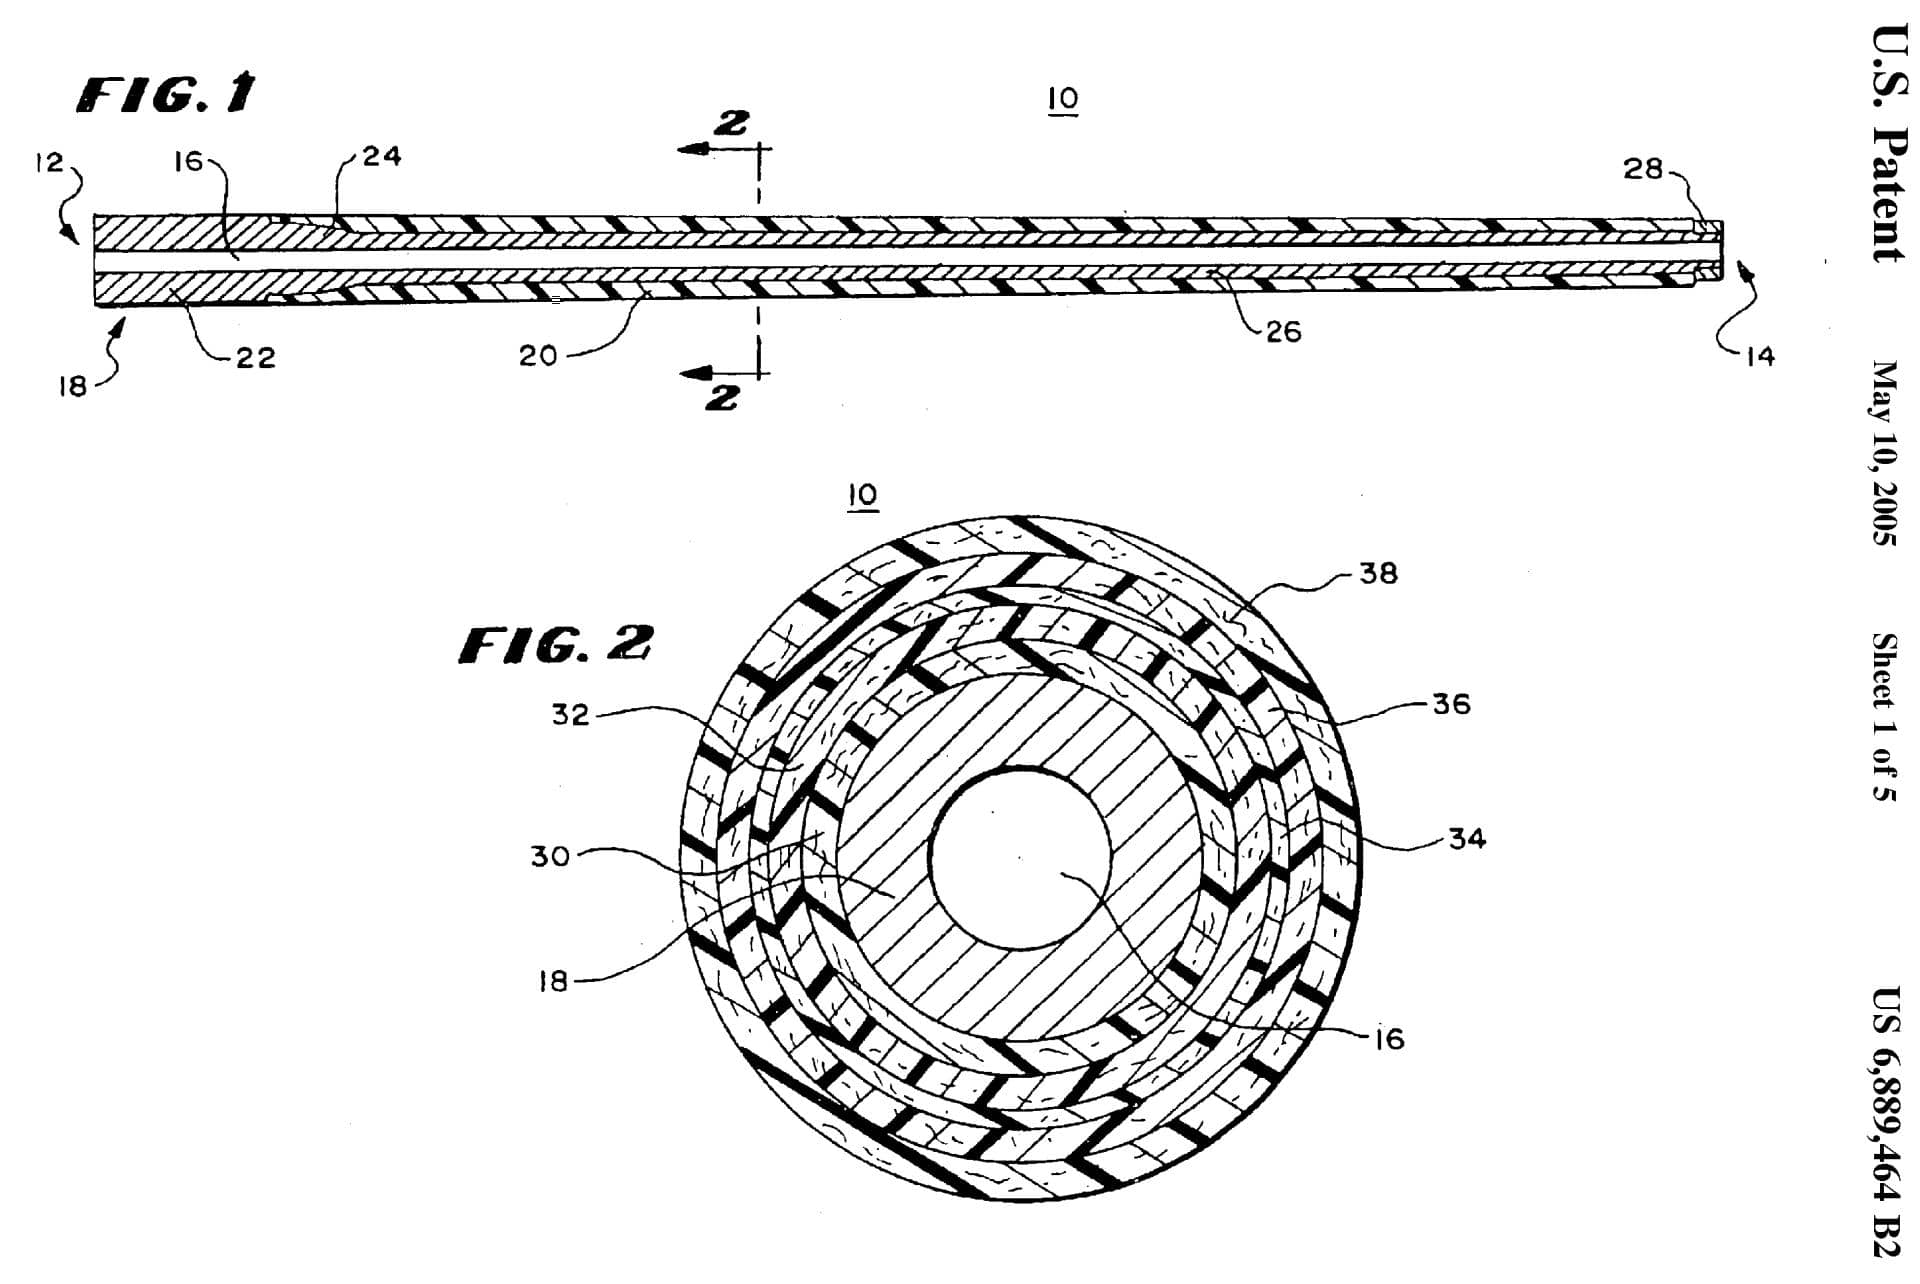 Proof Carbon Barrel Patent 6889464 Figures Showing How the Carbon Wrapping is Layered Around the Steel Core